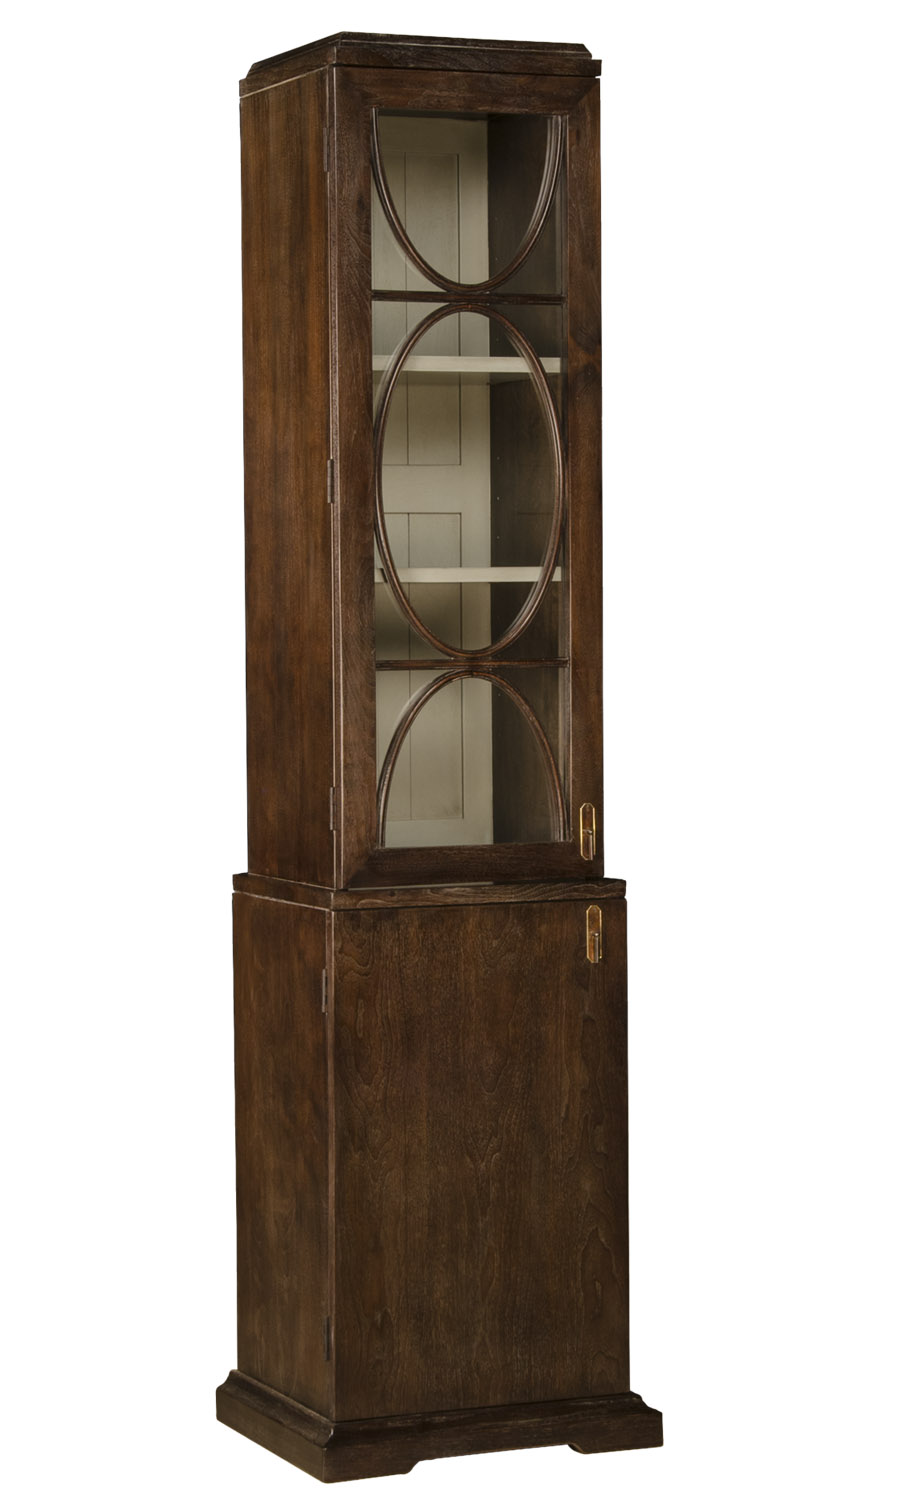 Lucette tranisitional elegant linen cabinet w oval grid detail in doors by Woodland furniture